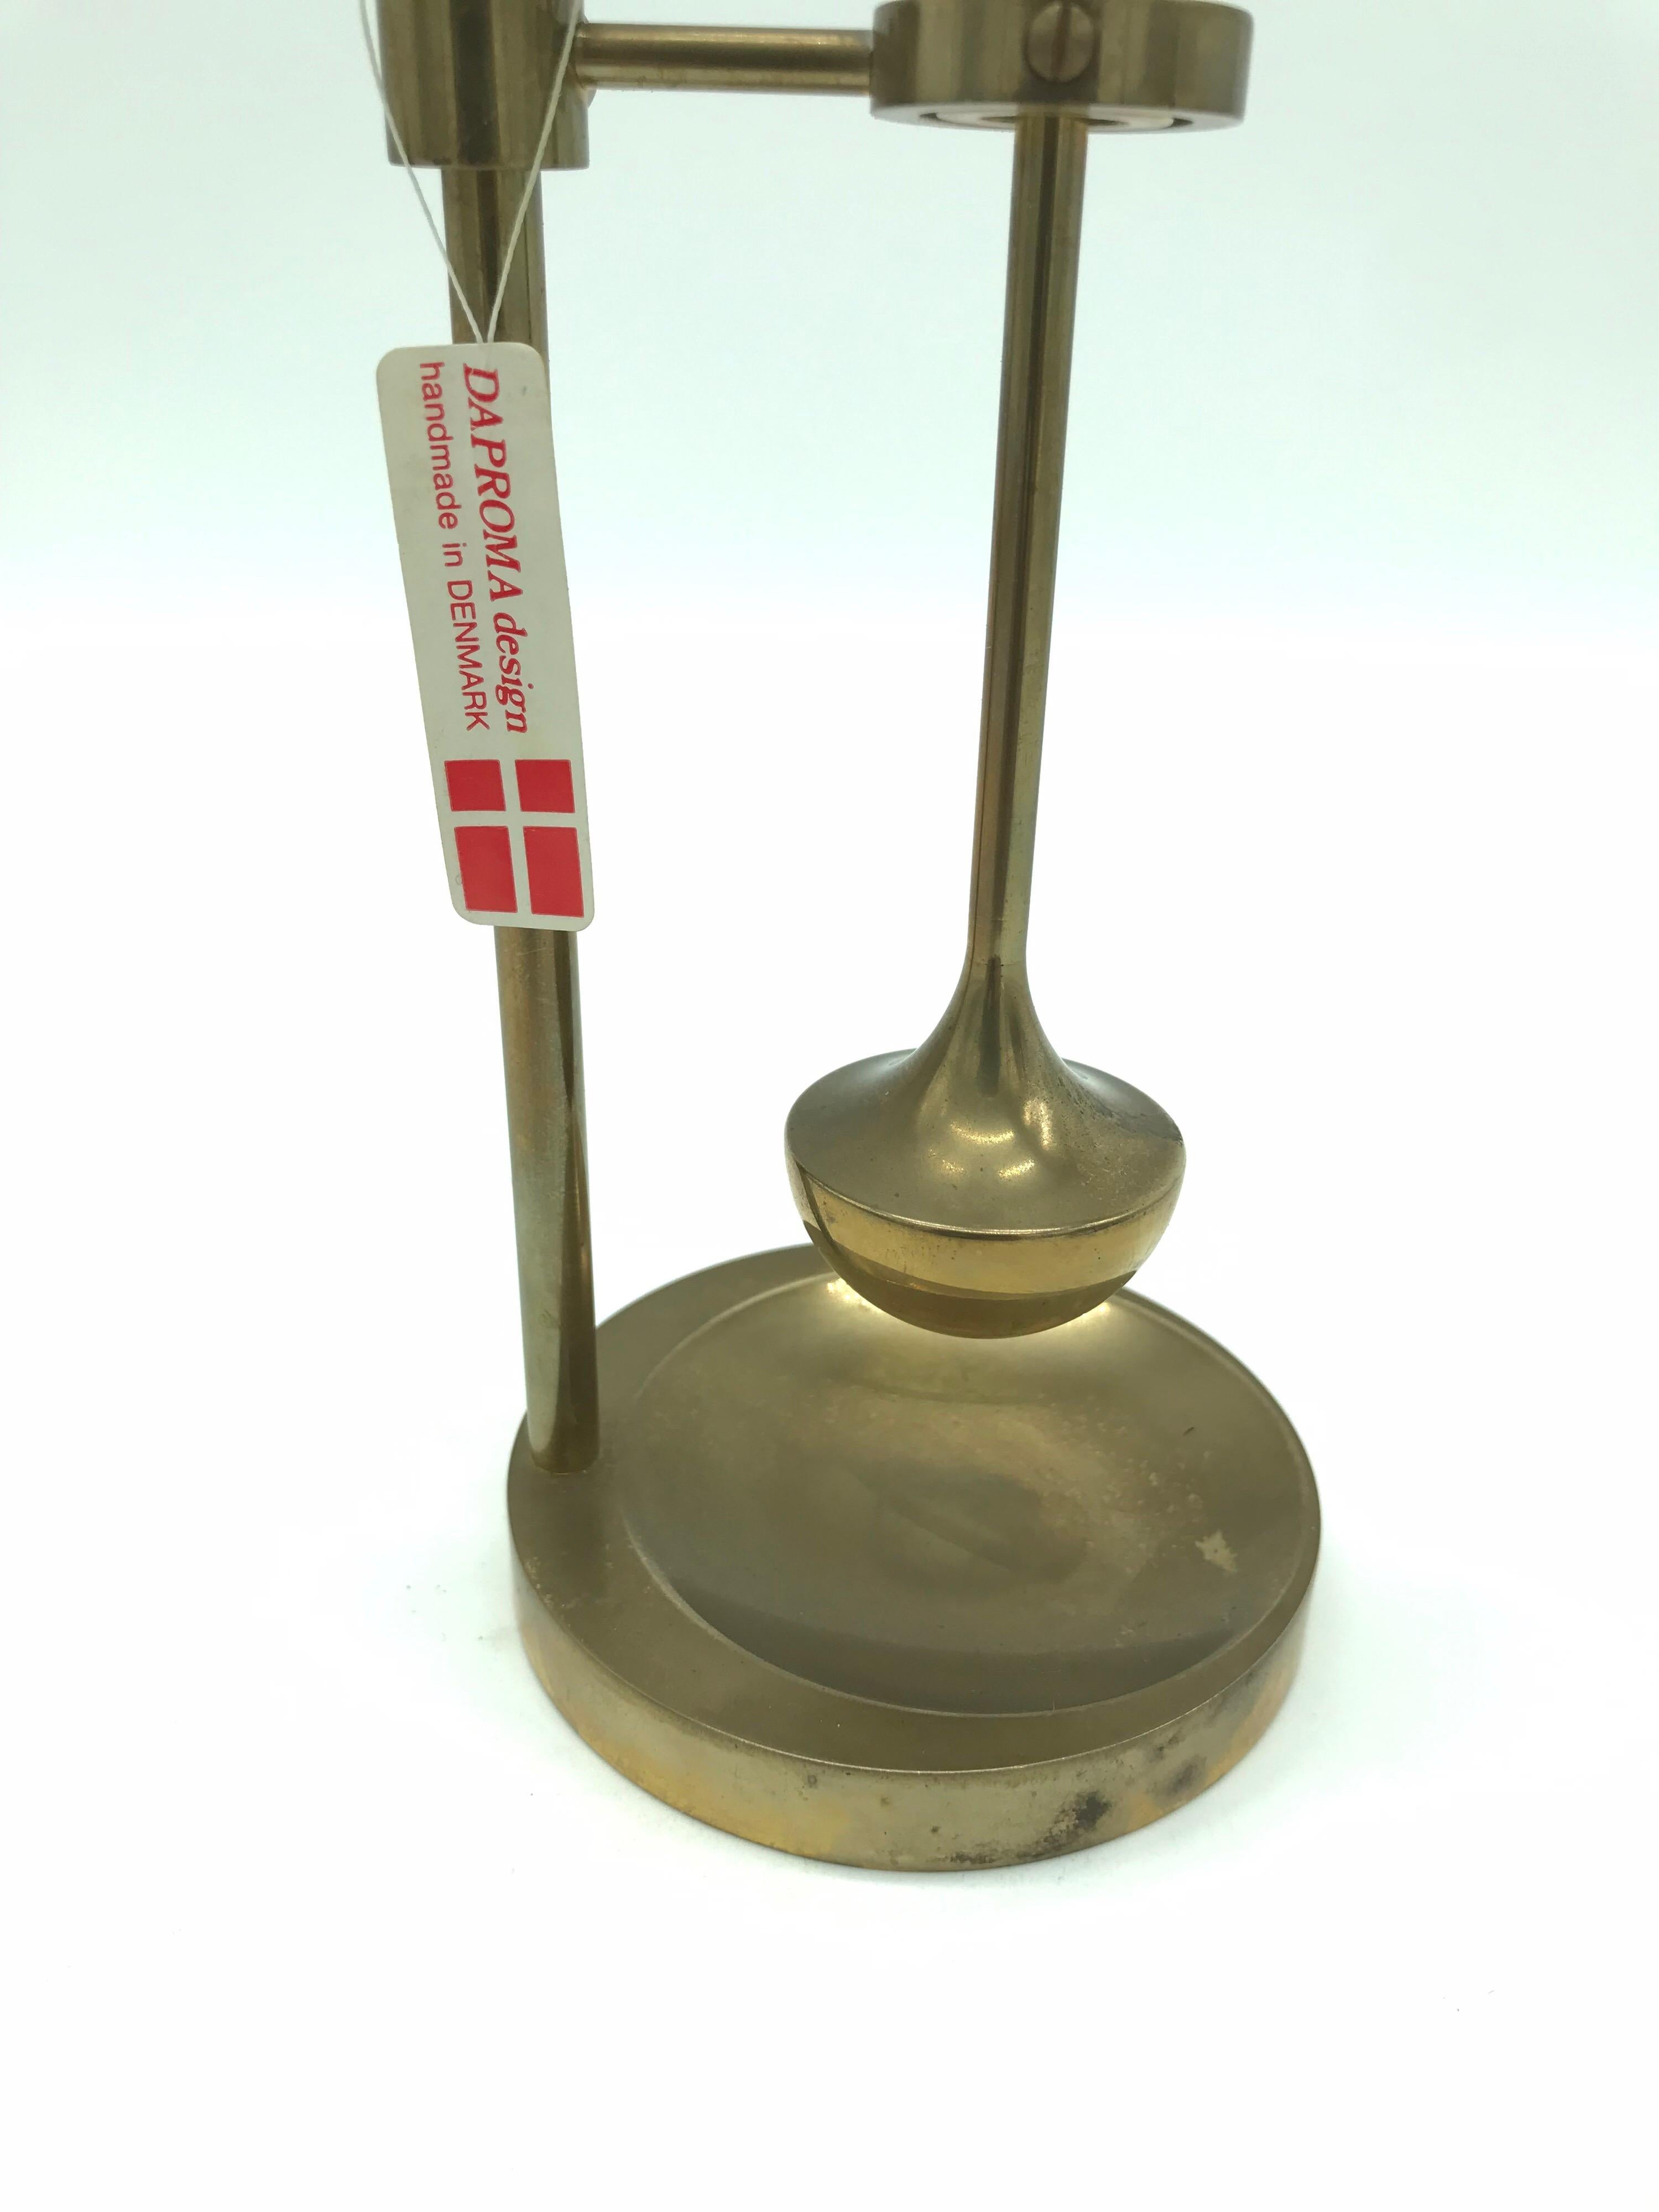 Vintage unused midcentury oil lamp by Ilse Ammonsen for Daproma Denmark 
This oil lamp has never been used and still has the original labels 
It has only received a wipe down to maintain patina to the surface of the brass 
If so desired it could